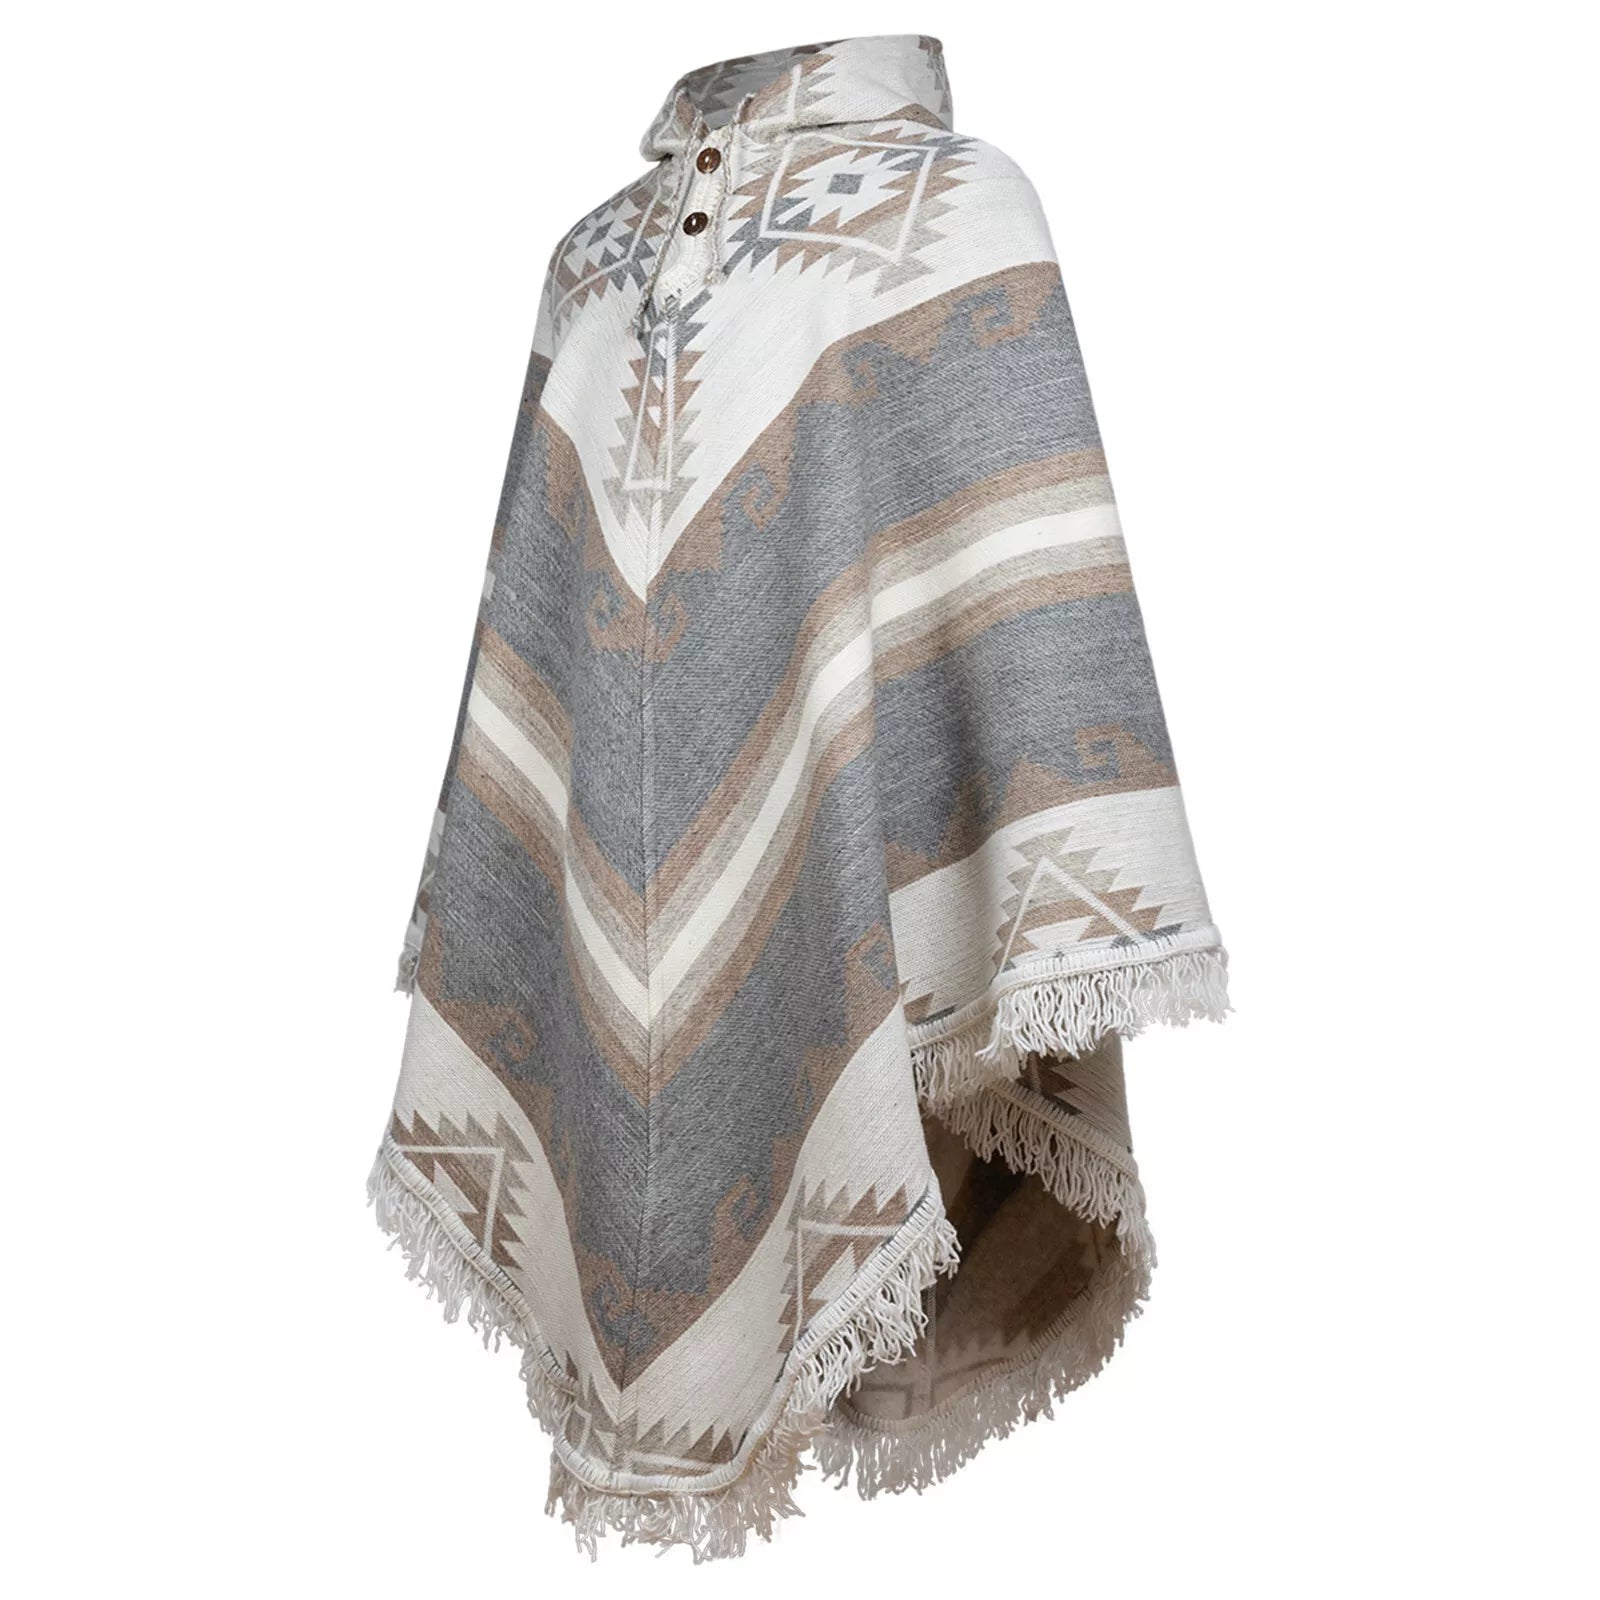 Antikuna - Llama Wool Unisex V-Shaped S. American Handwoven Thick Hooded Poncho - Andean pattern - gray/earth tones